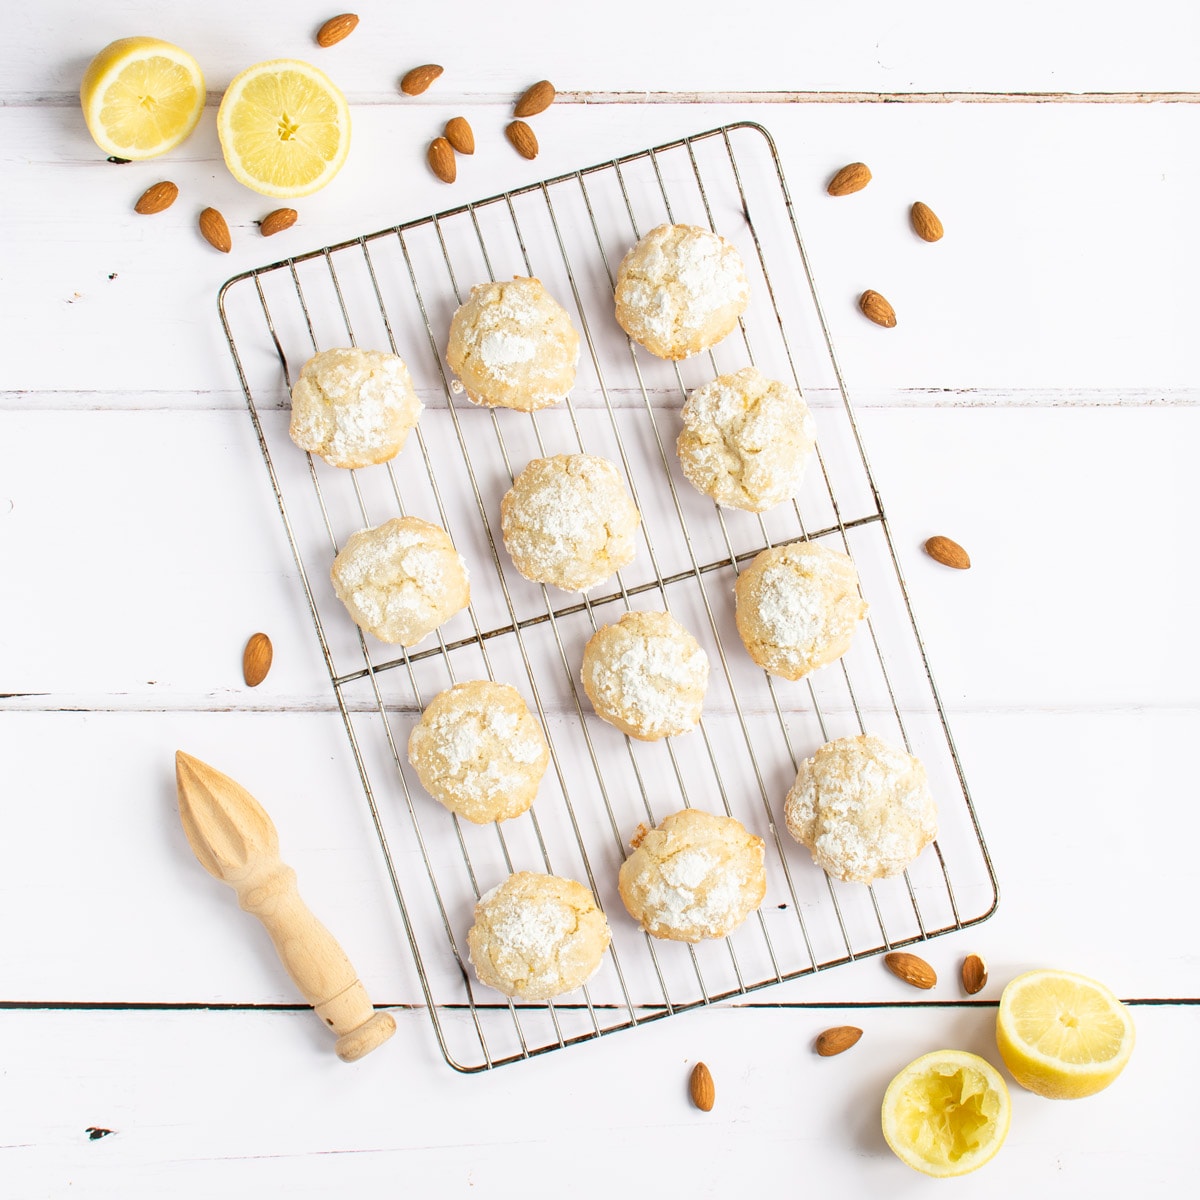 Delicious soft centred Lemon Amaretti Biscuits. So easy to make, crisp on the outside, chewy in the middle and packed with lemon flavour. They’re naturally gluten-free too.